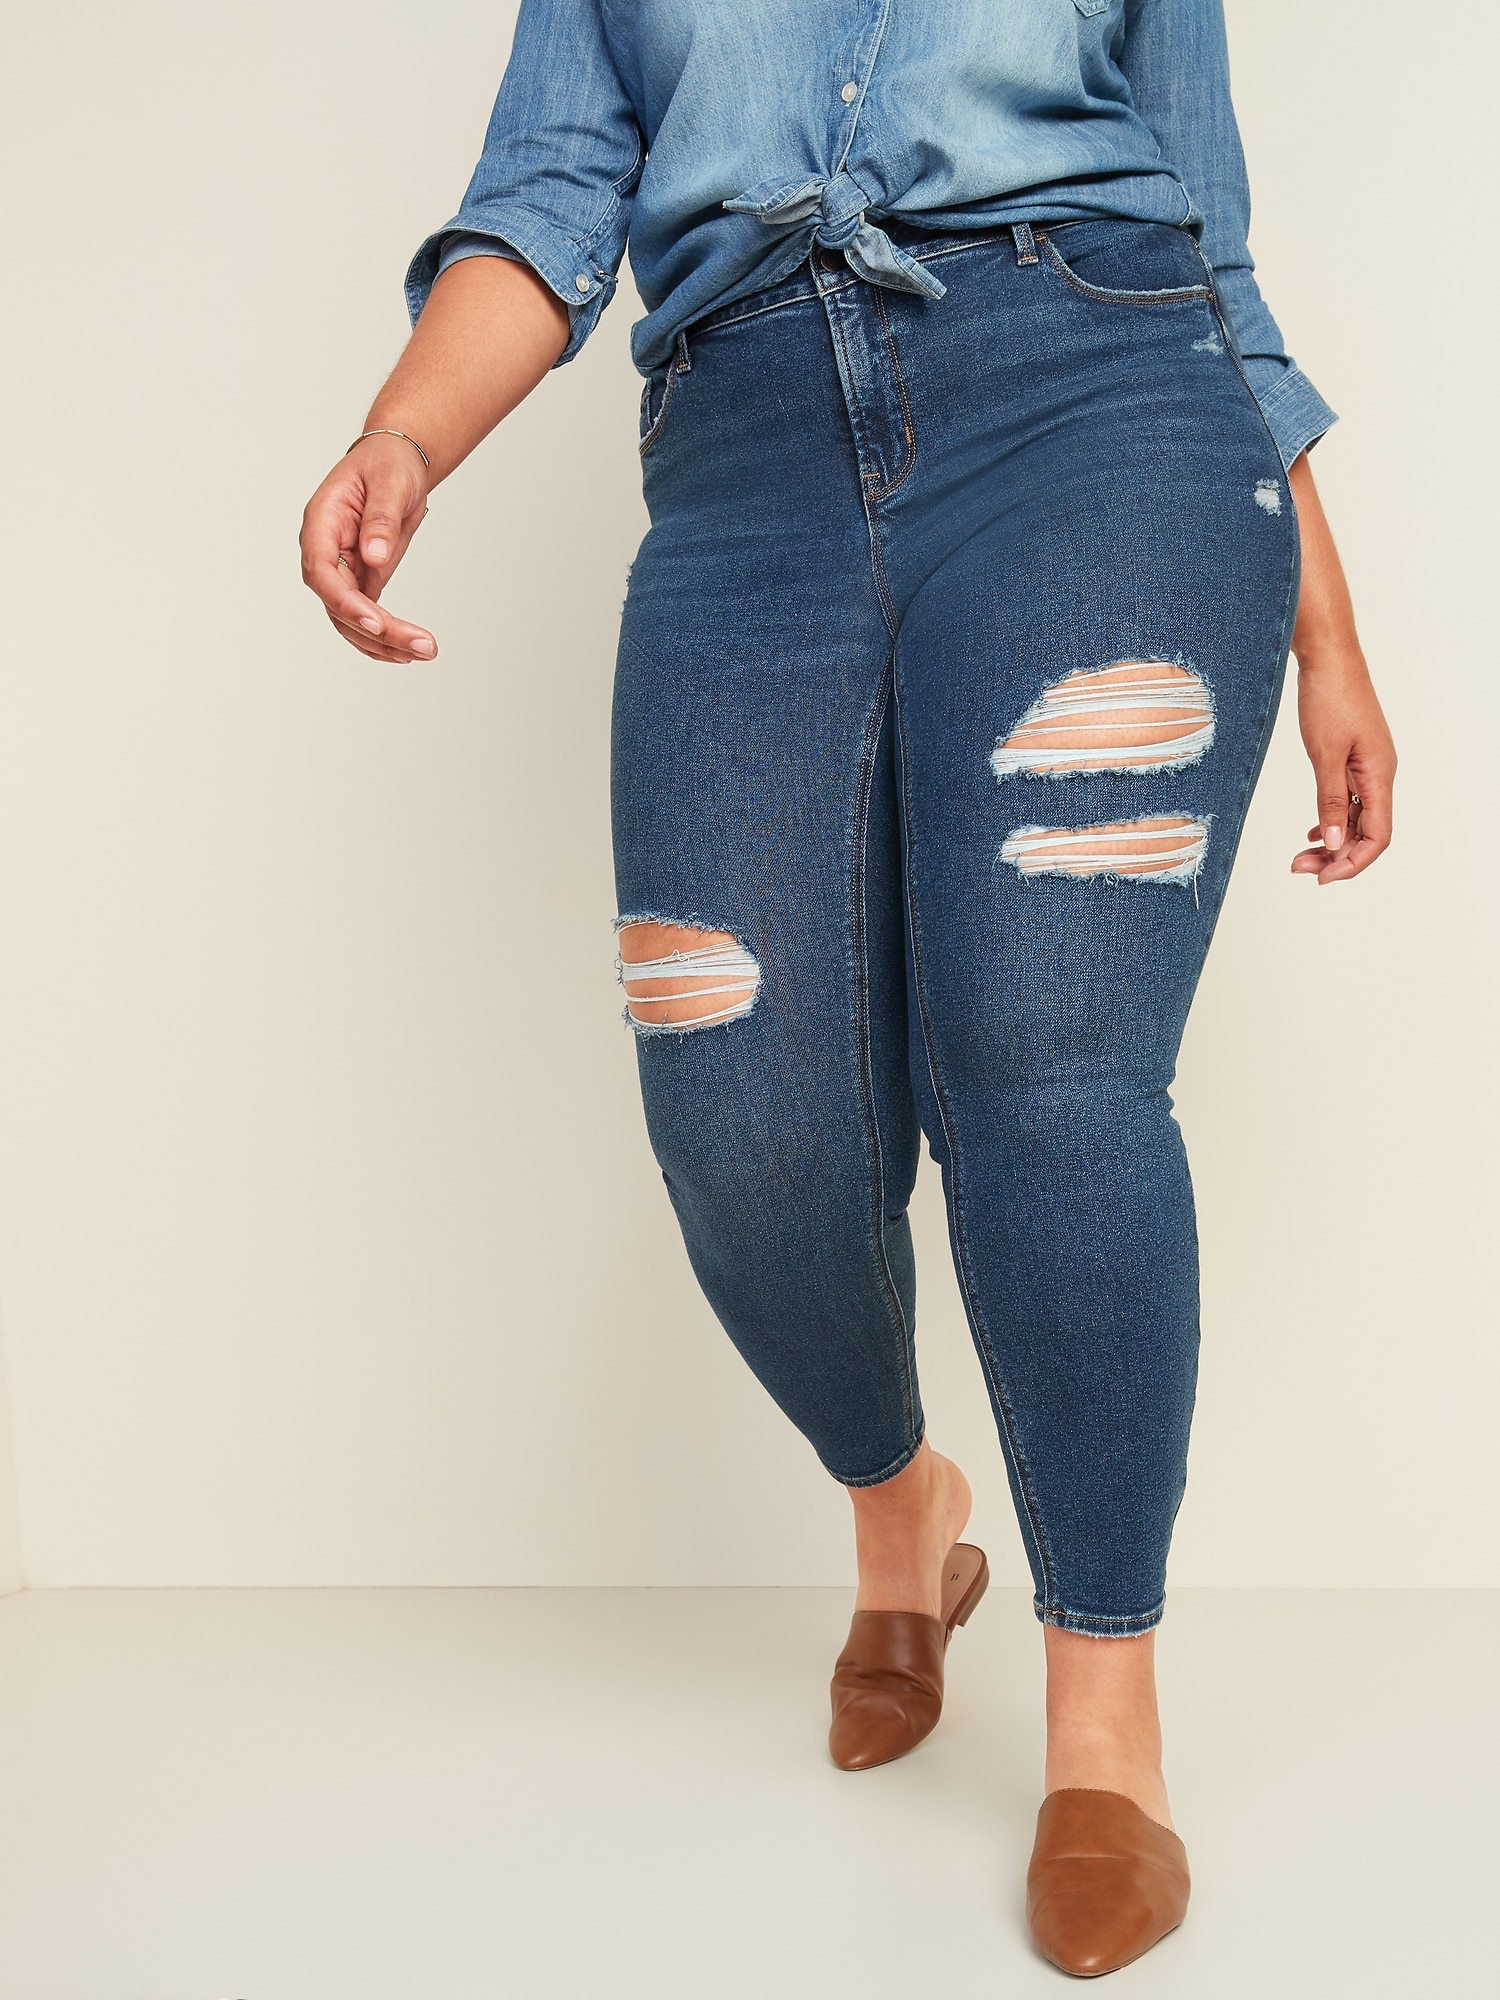 high waisted ripped skinny jeans plus size